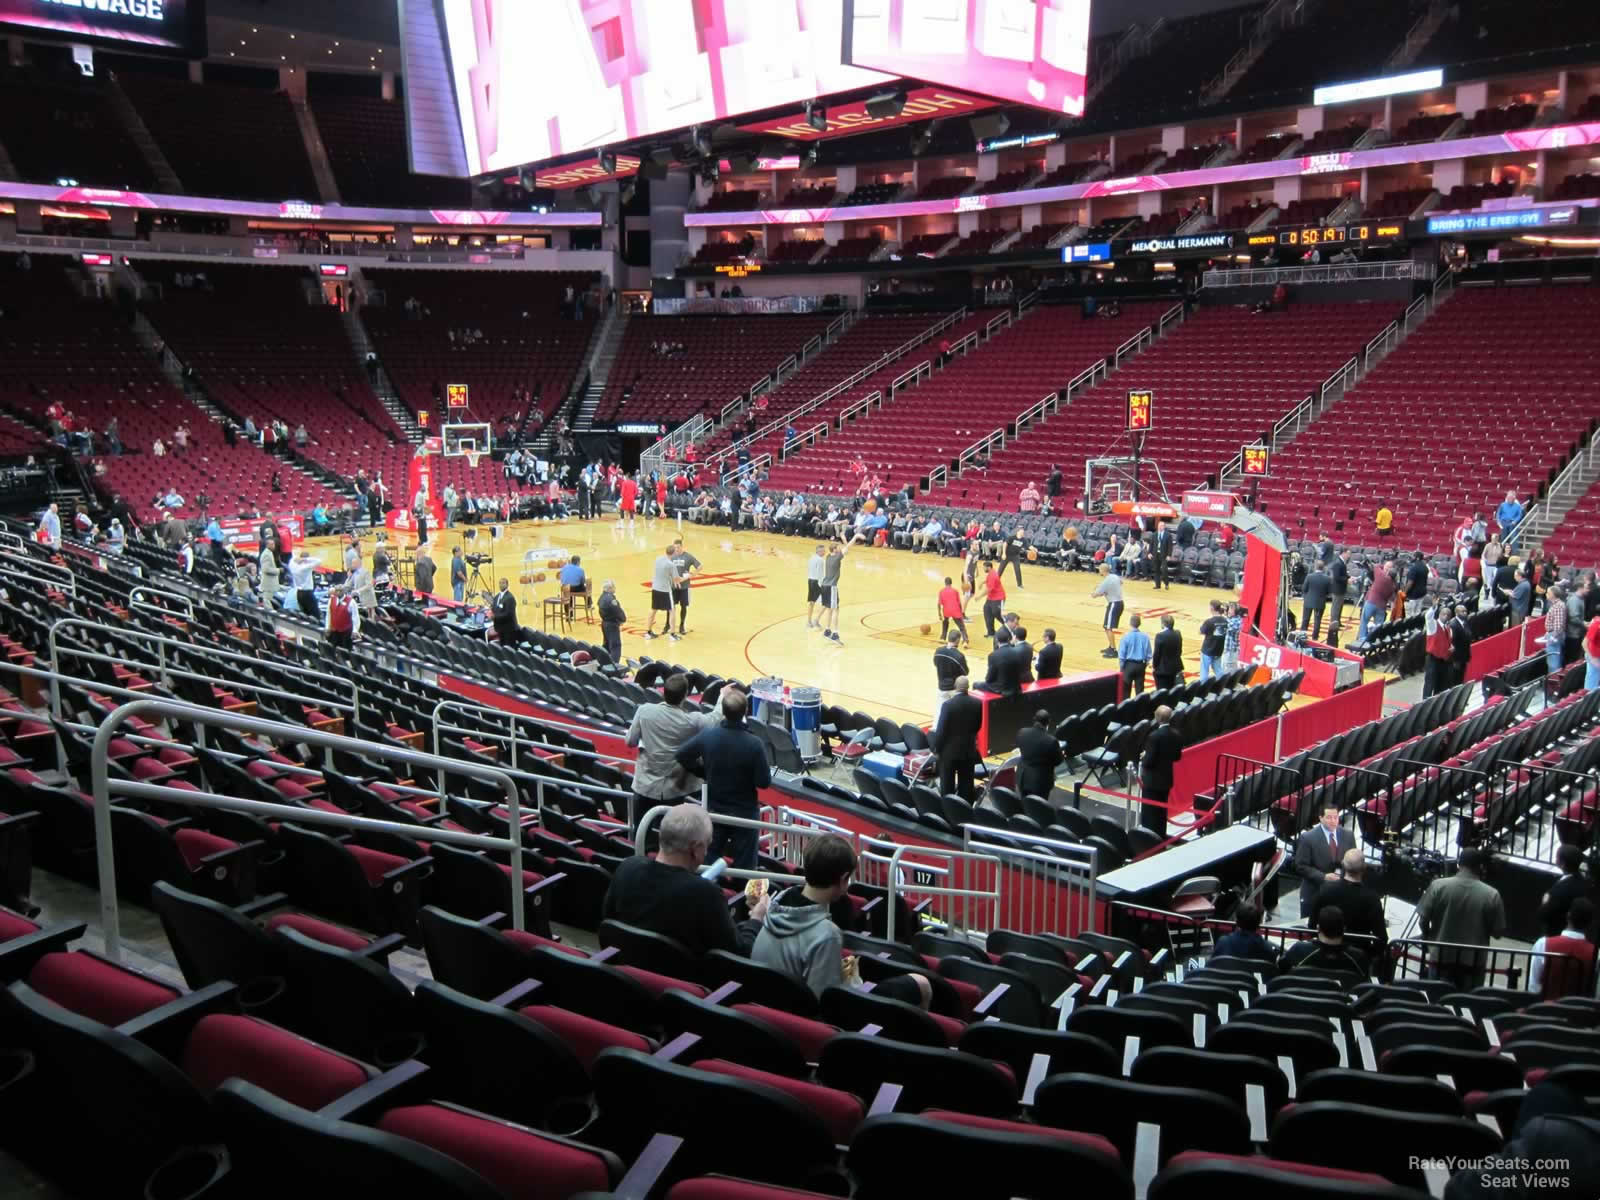 Houston Rockets Seating Chart View